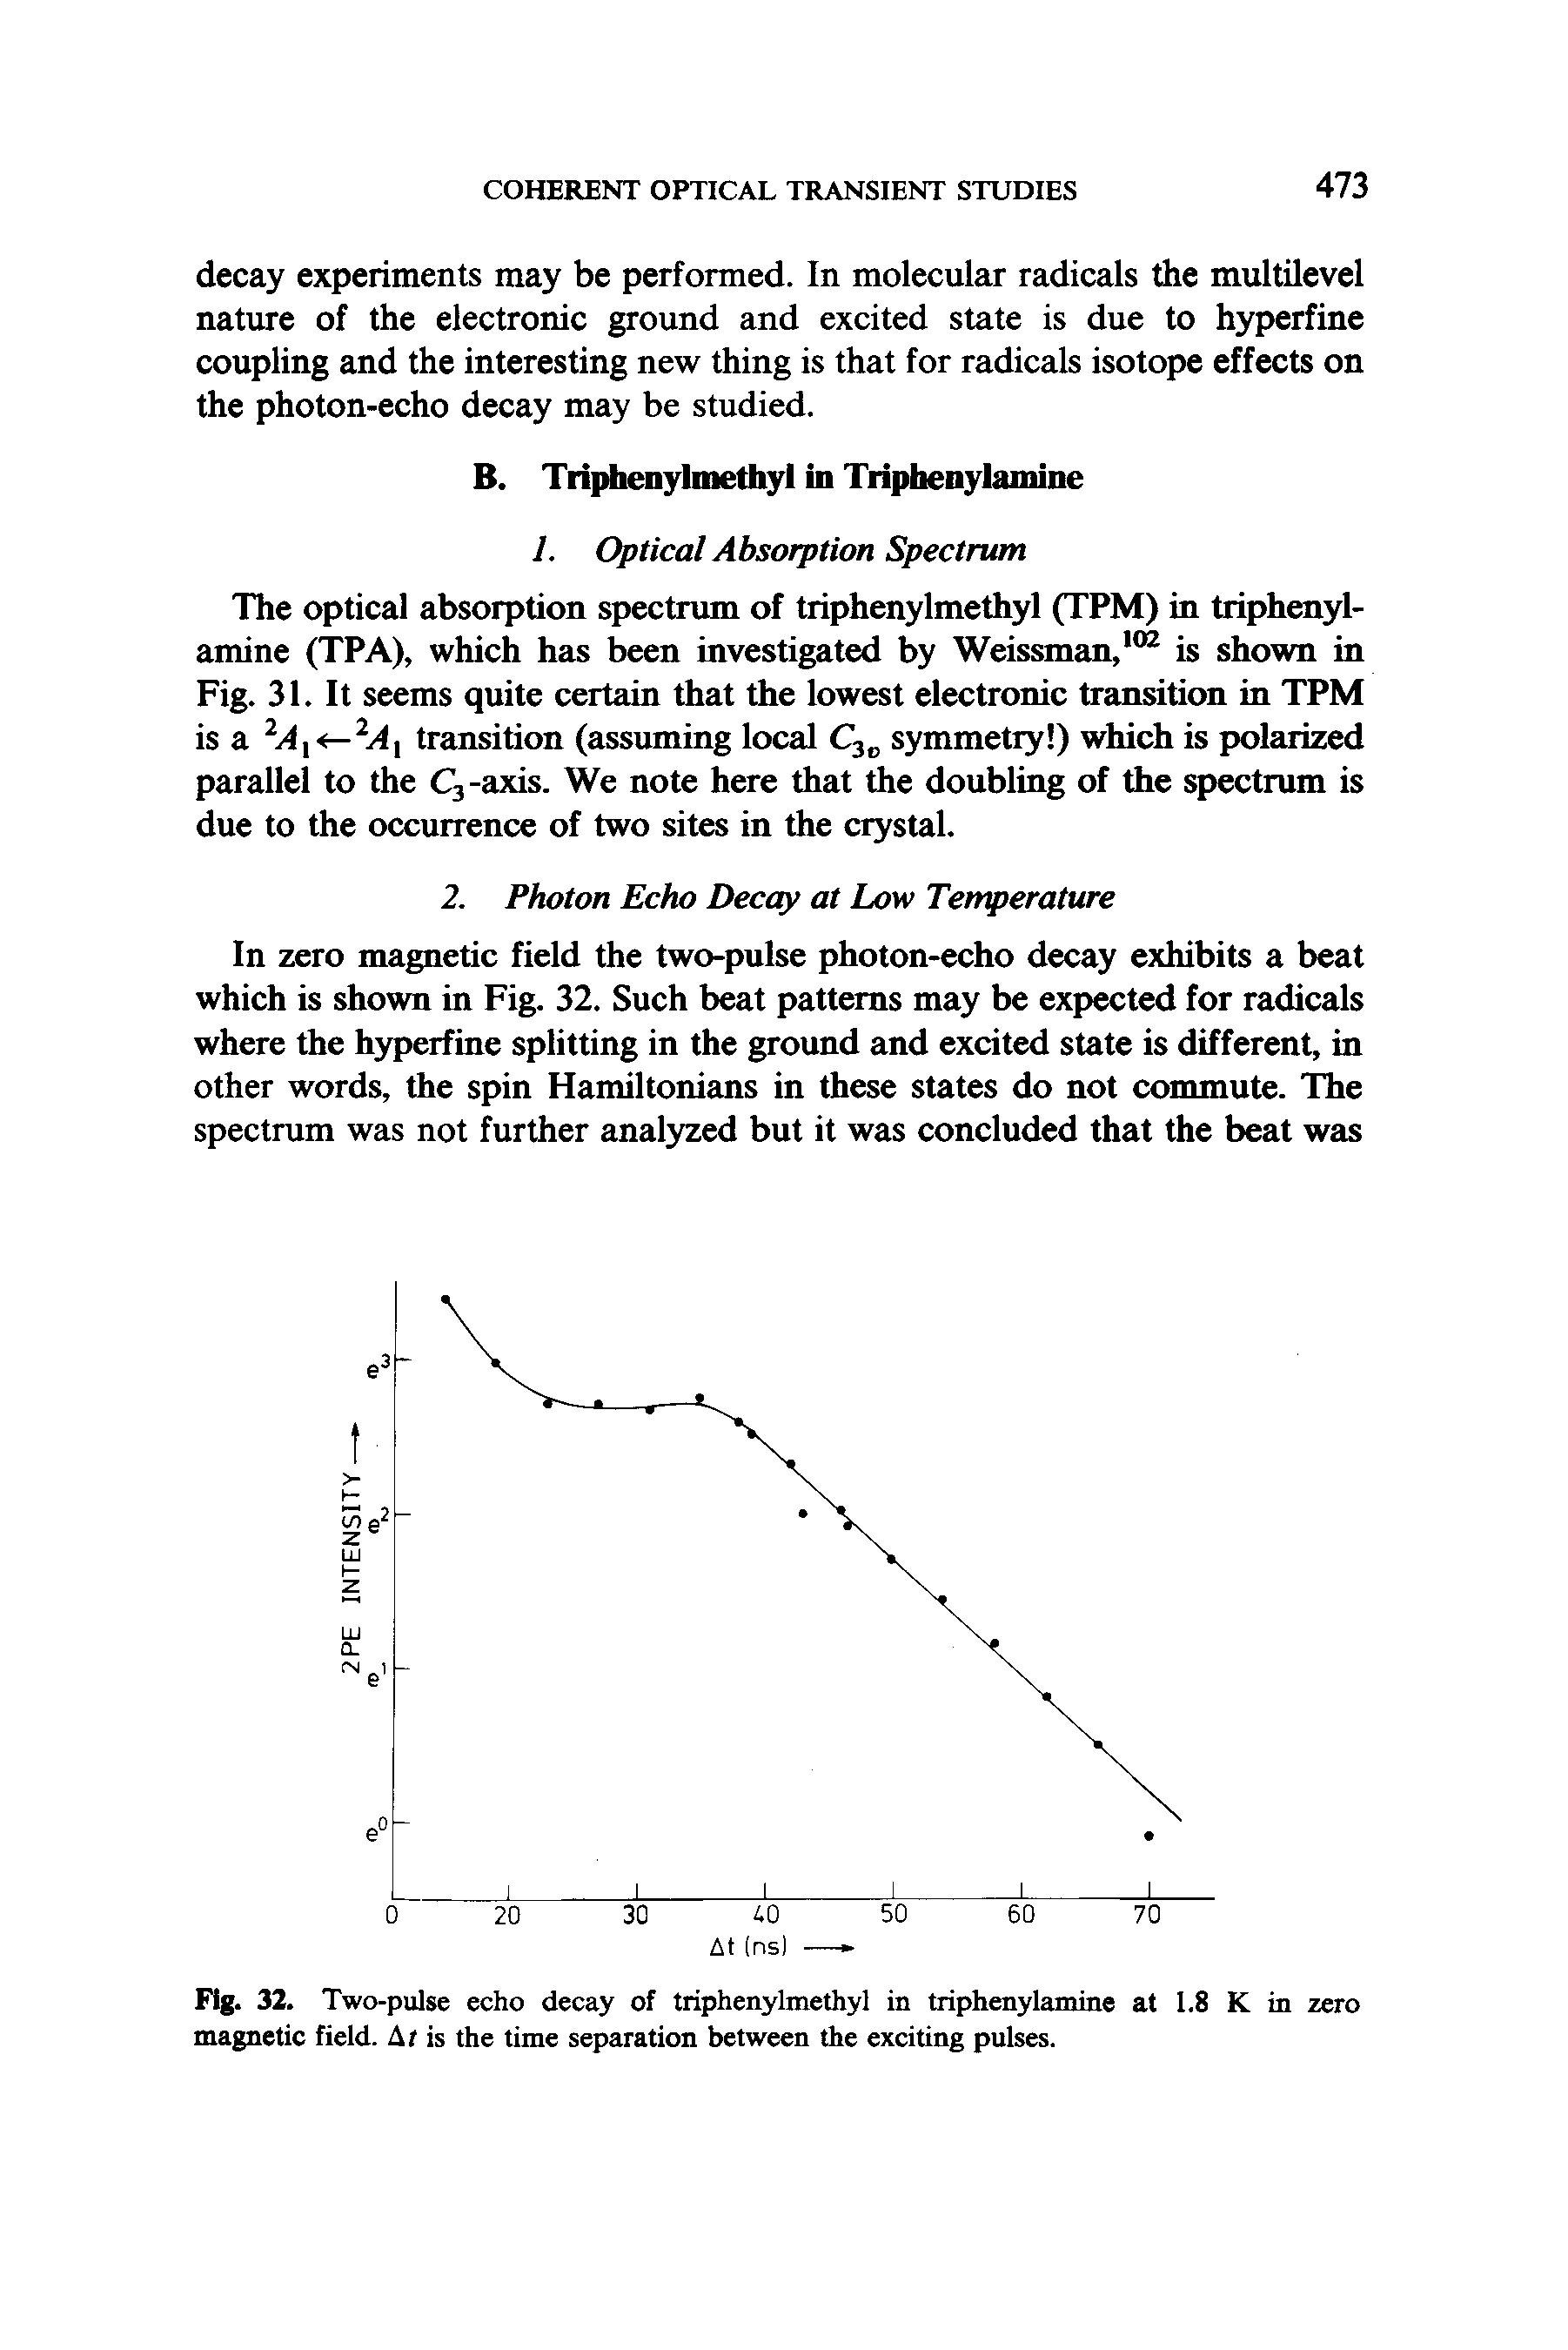 Fig. 32. Two-pulse echo decay of triphenylmethyl in triphenylamine at 1.8 K in zero magnetic field. At is the time separation between the exciting pulses.